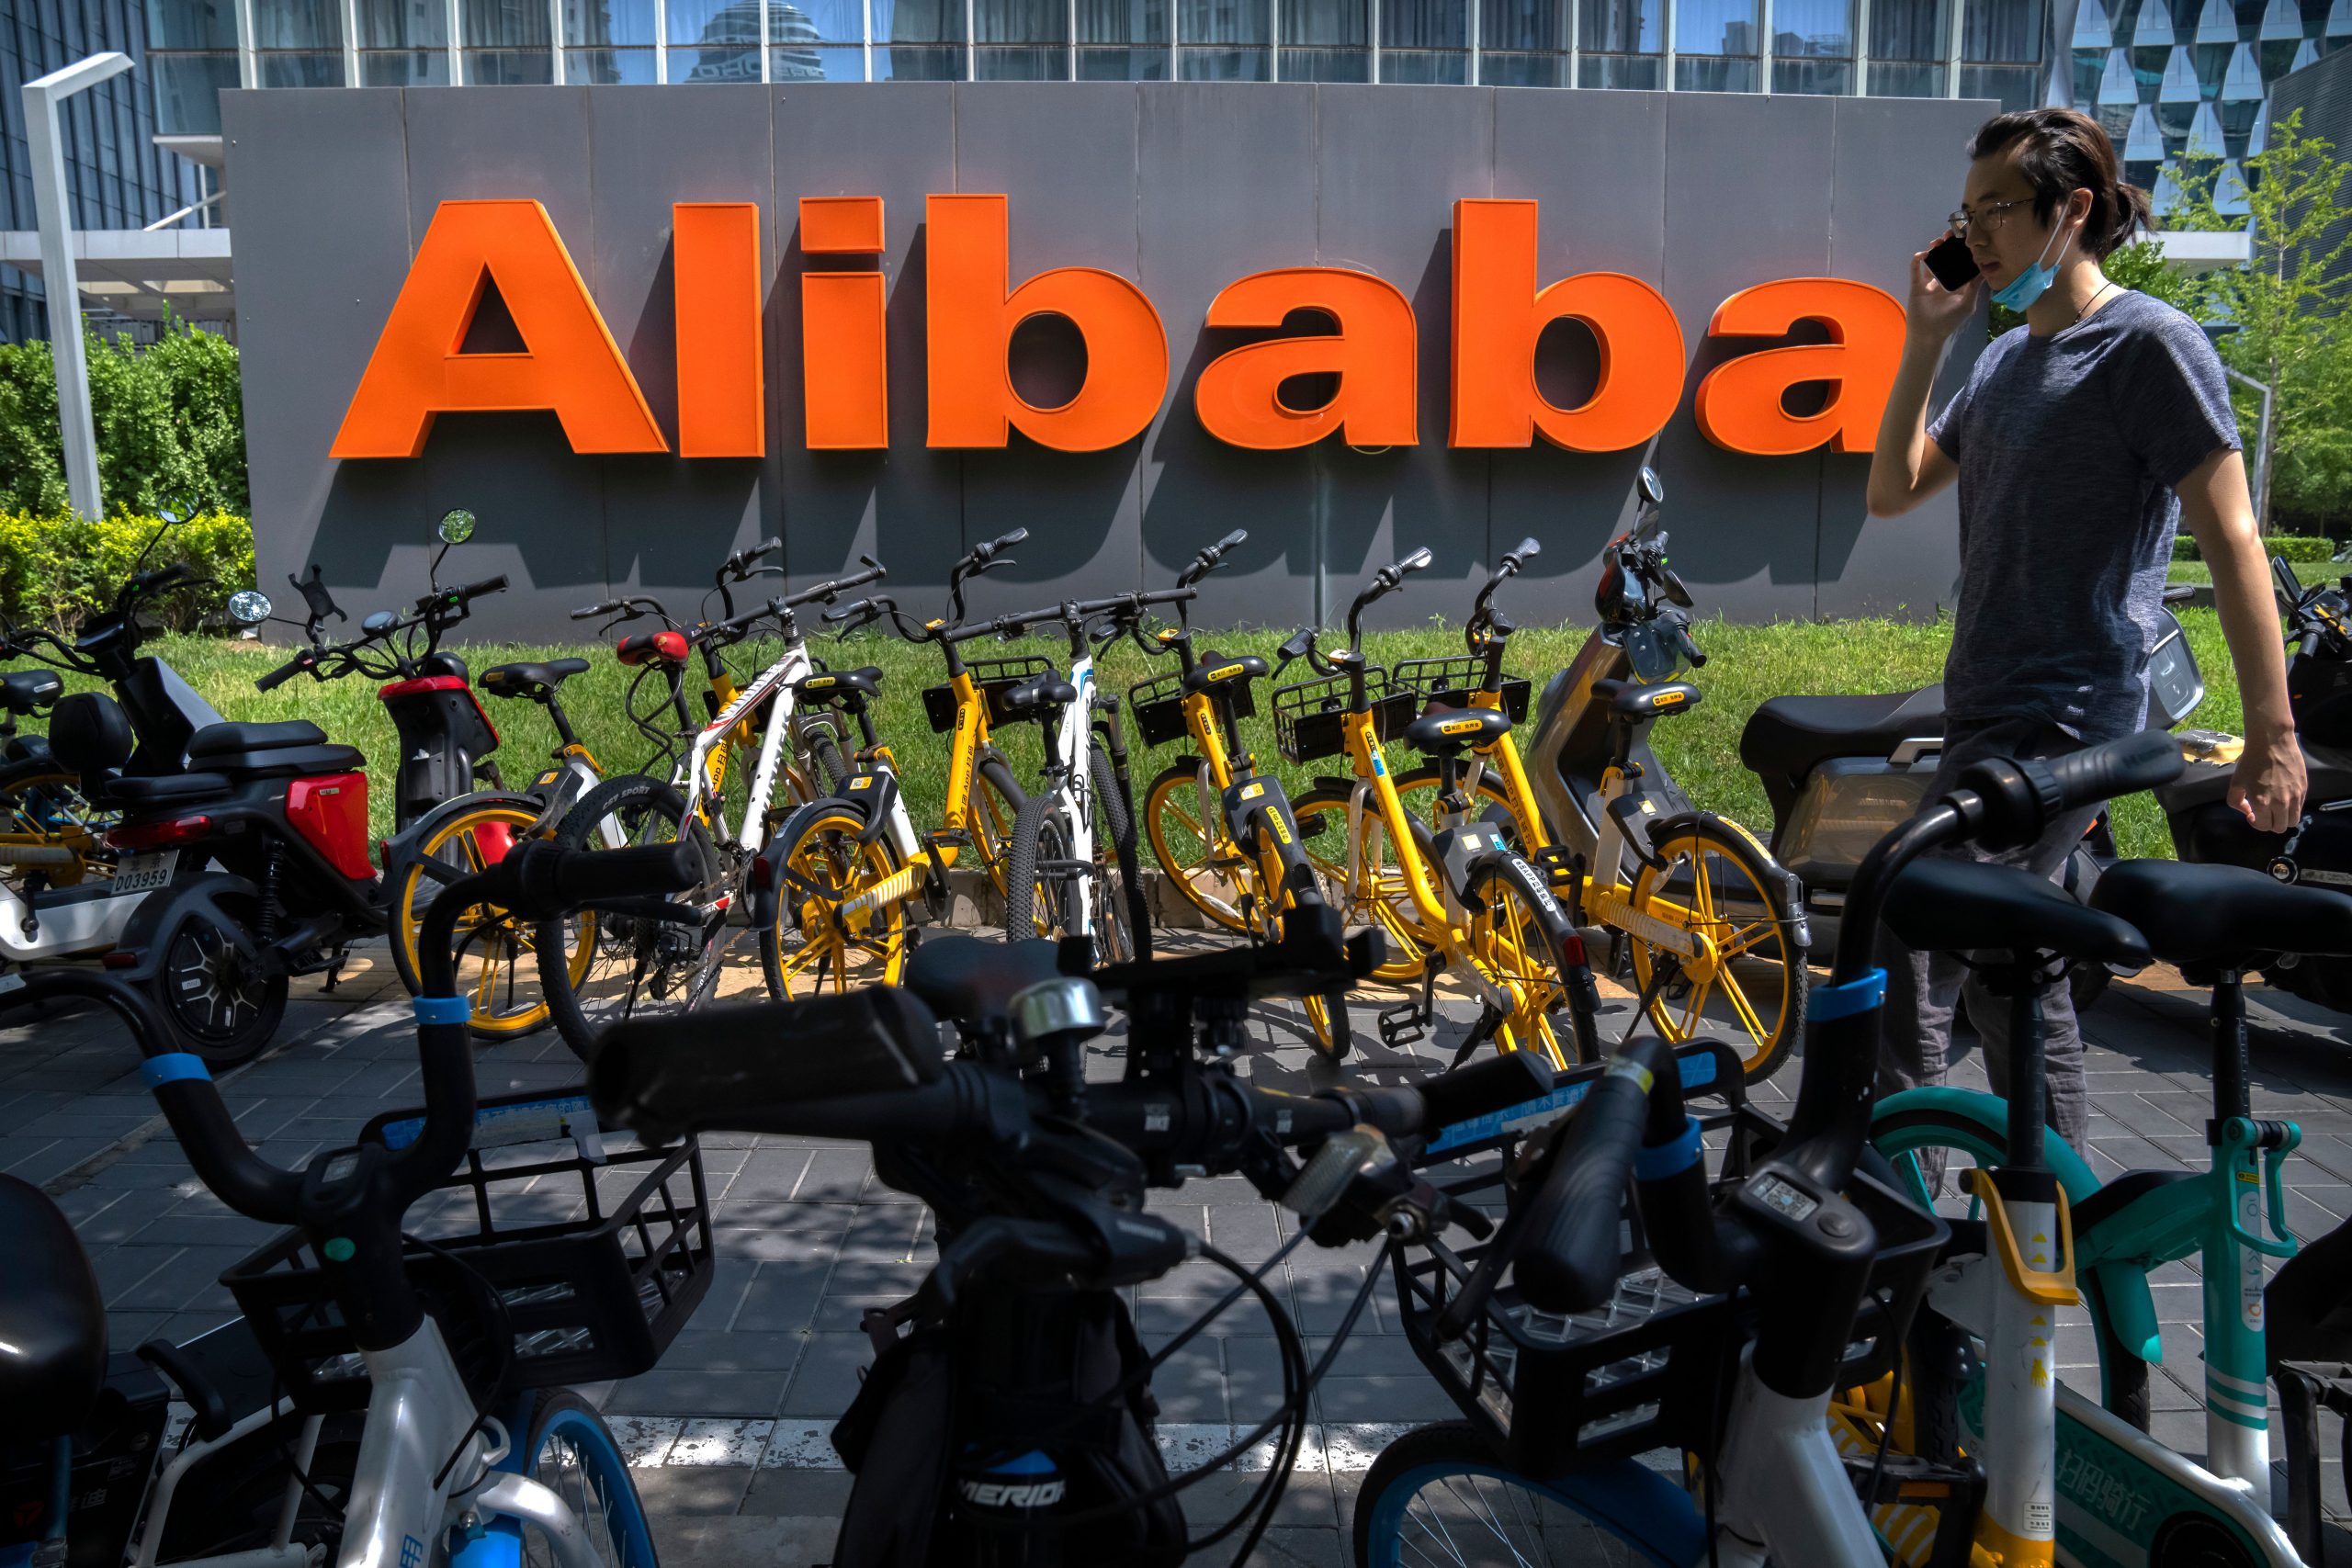 China court drops sexual assault case against former Alibaba employee